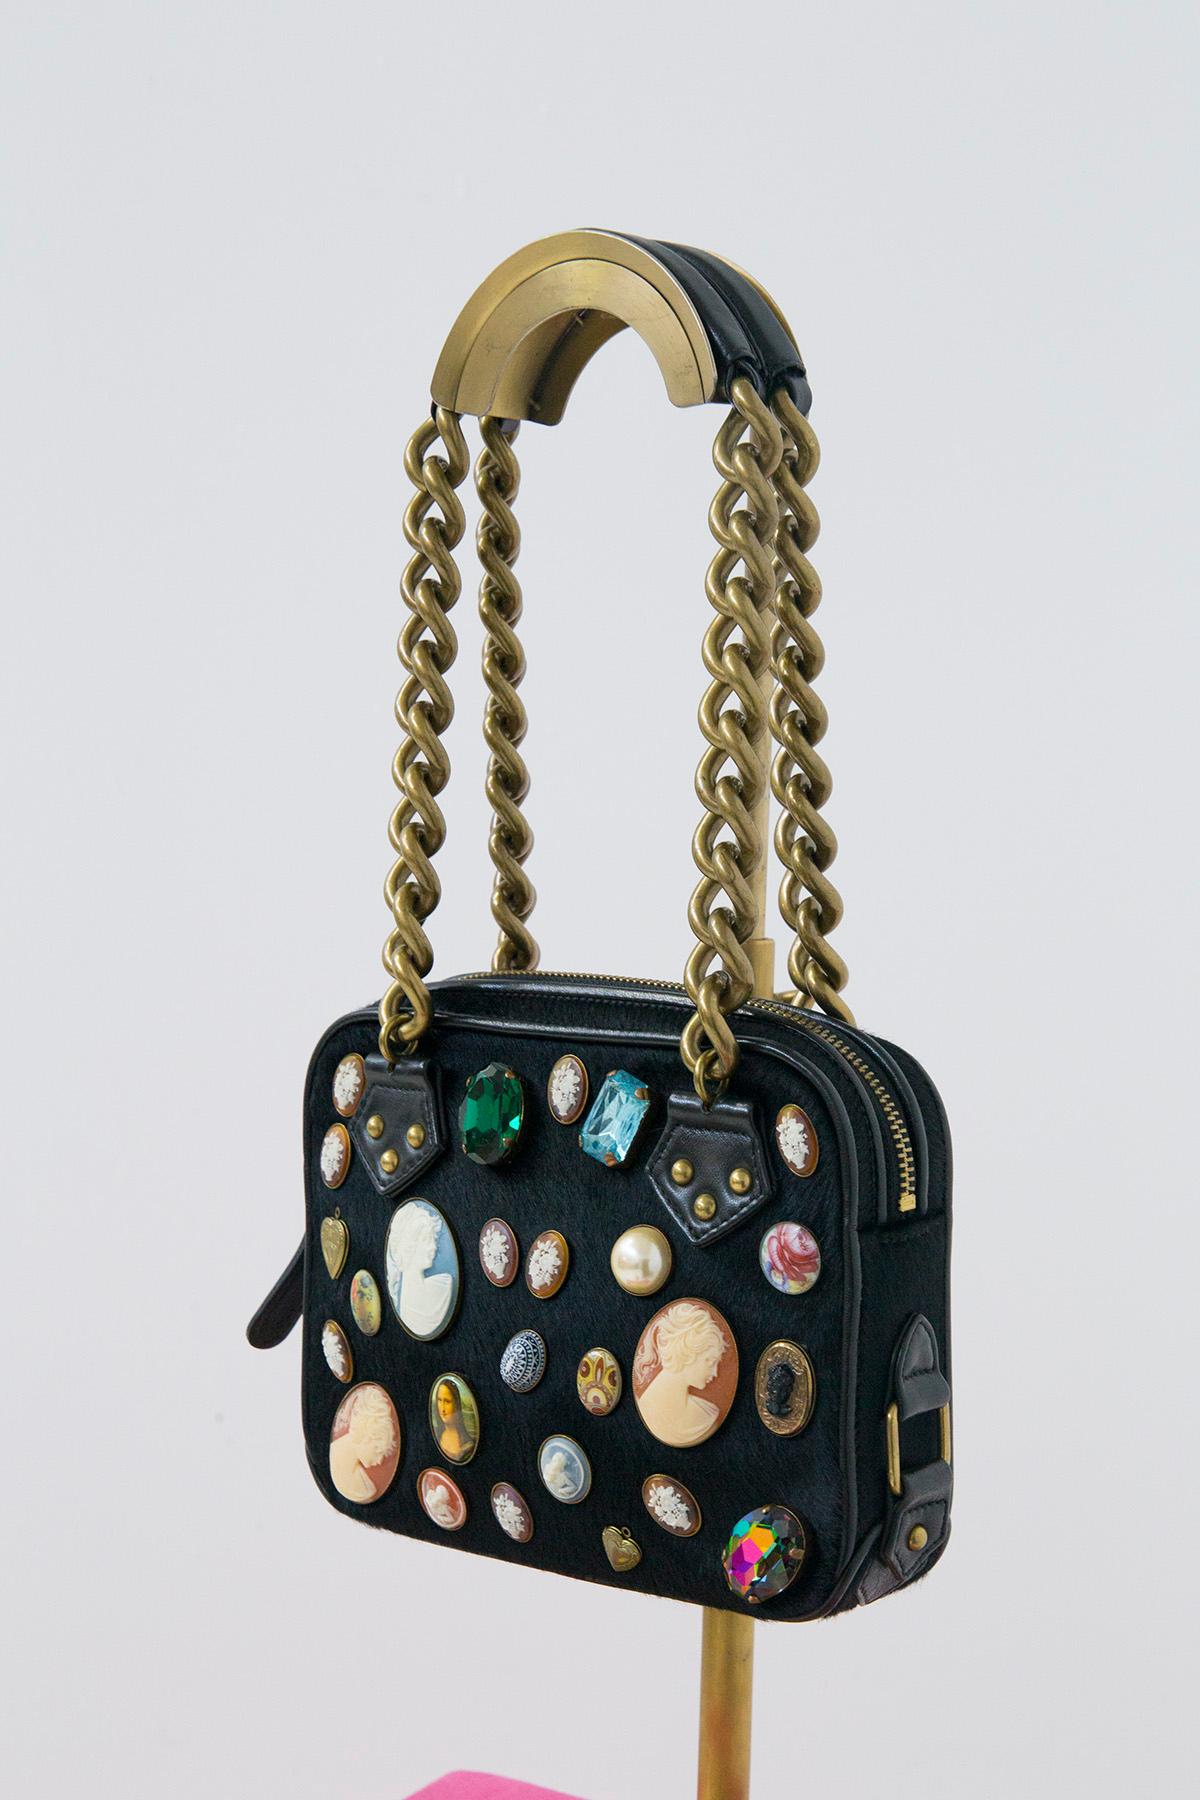 Stunning shoulder bag from the great Paul Smith manufacture in London. The bag features a gold metal chain-work shoulder strap with leather inserts at the top to soften the shoulder. The bag has a black leather frame but in the front of the bag we